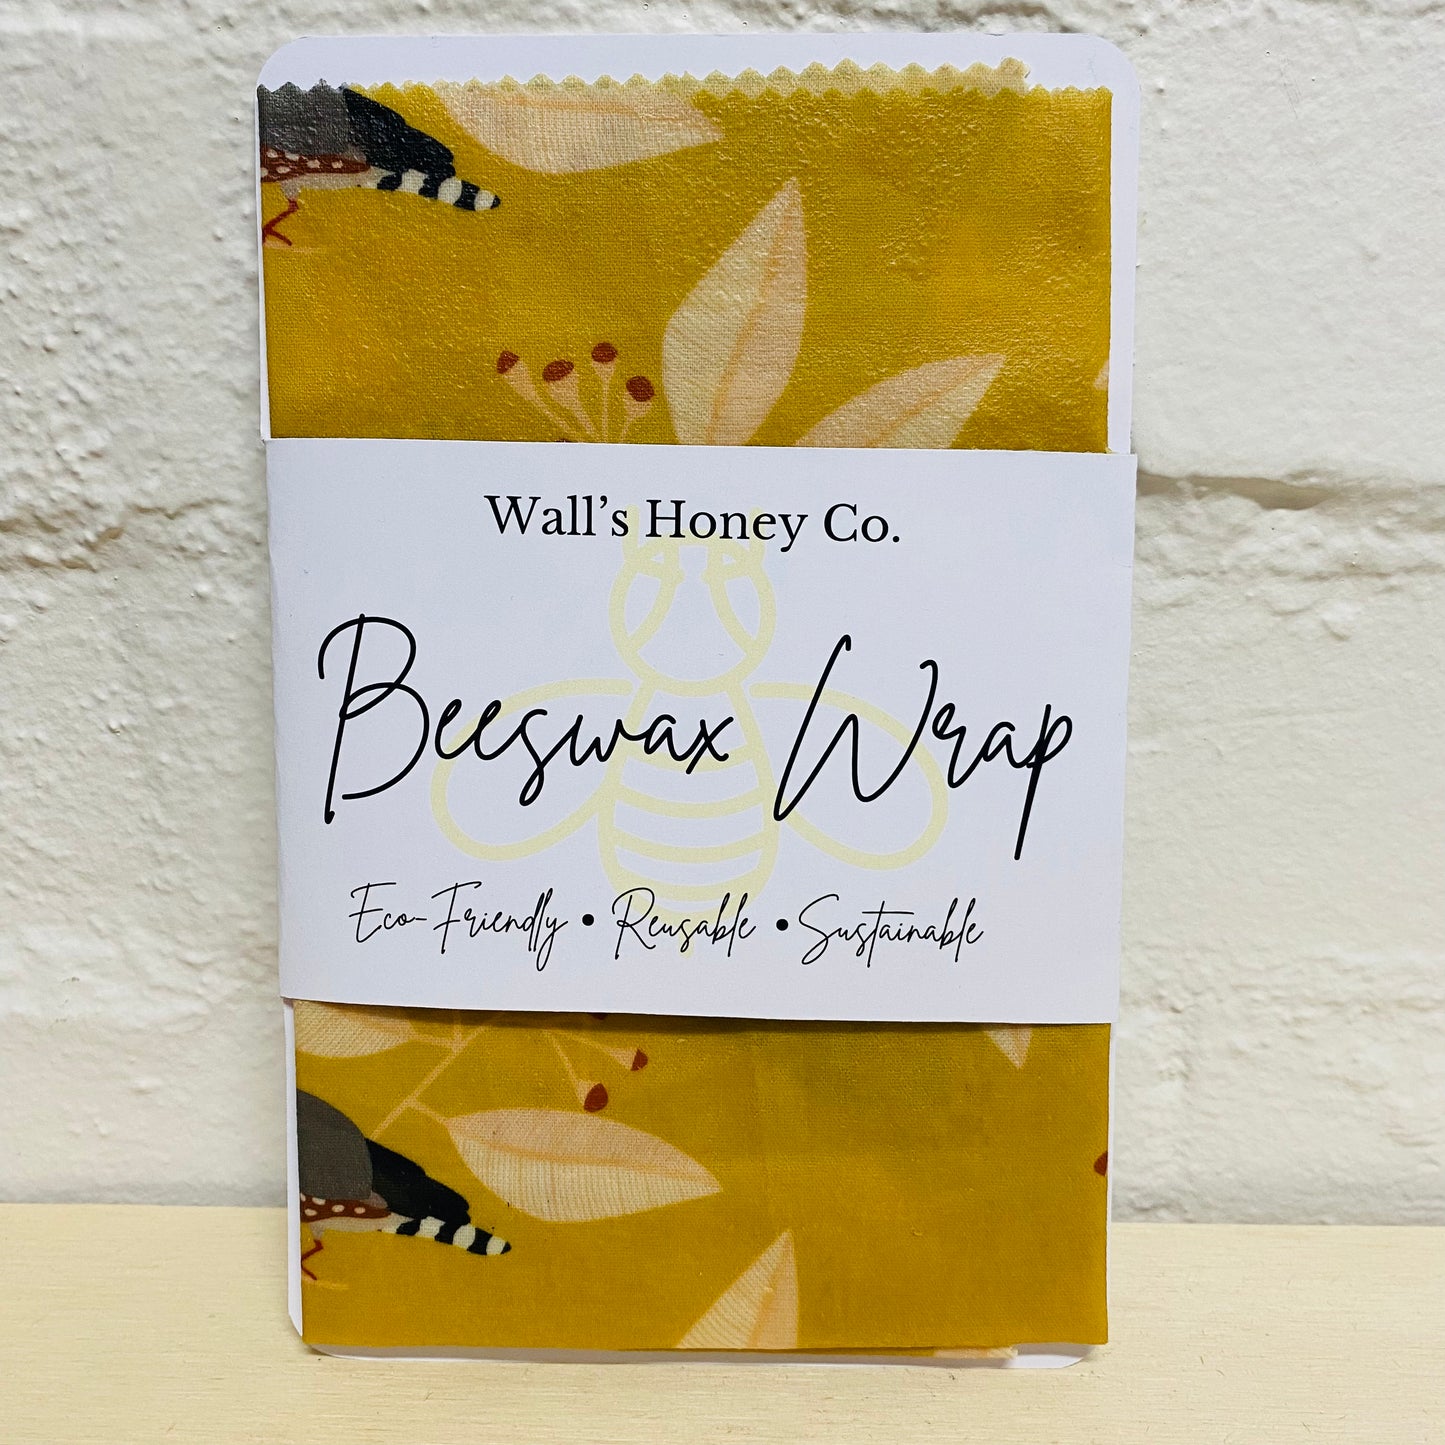 Wall's Beeswax Wrap - 1 x Large (35cm x 35xm)